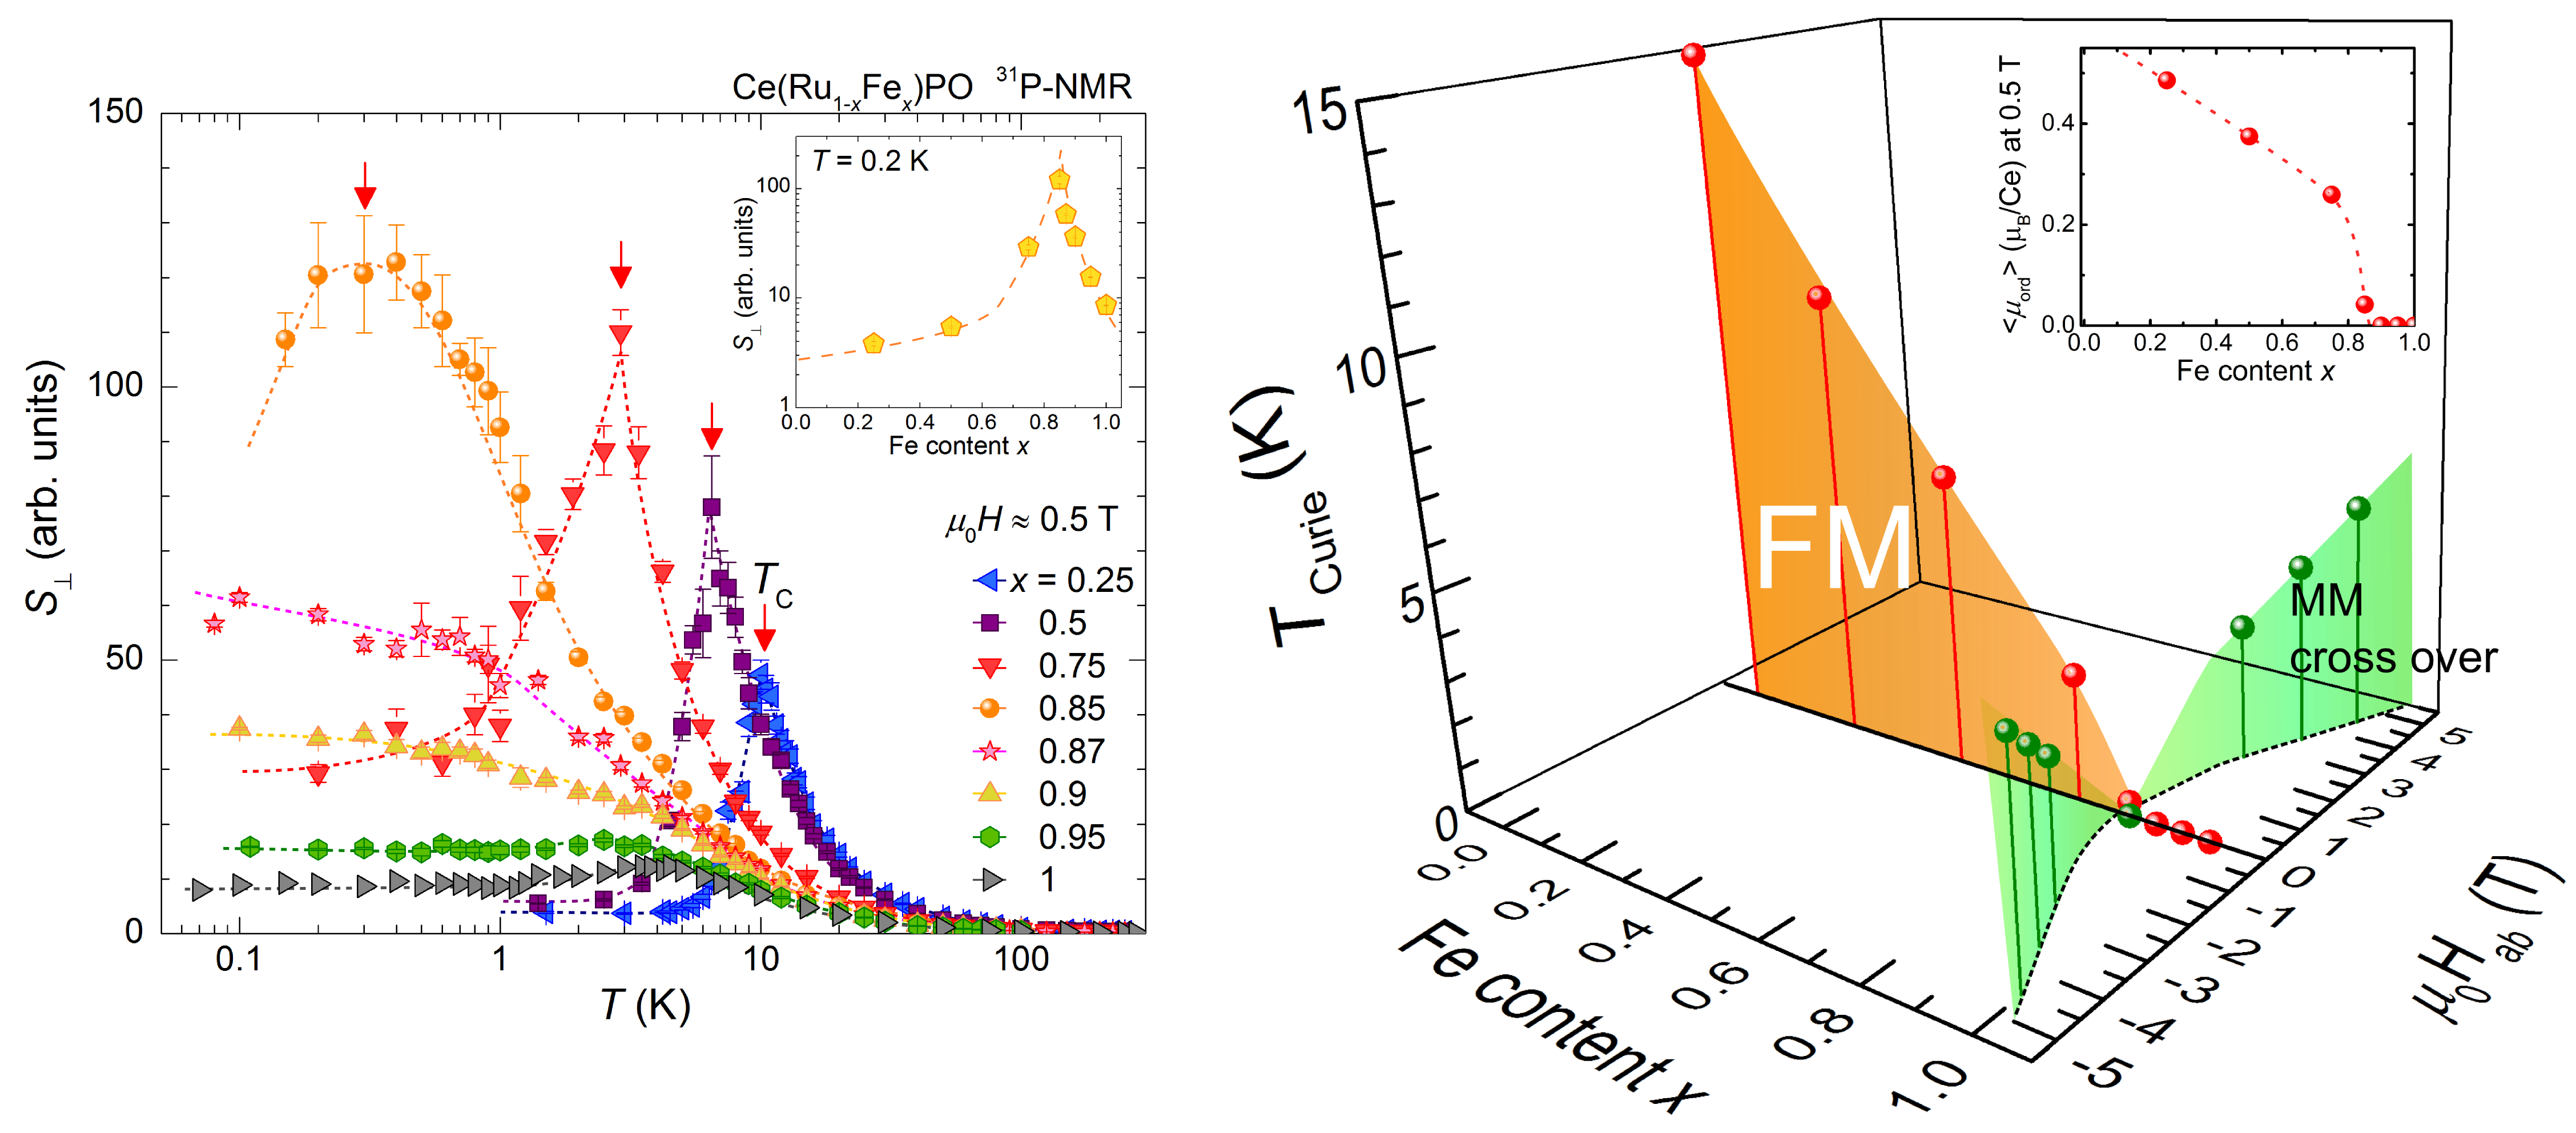 NMR results and 3D phase diagram of Ce(RuFe)PO